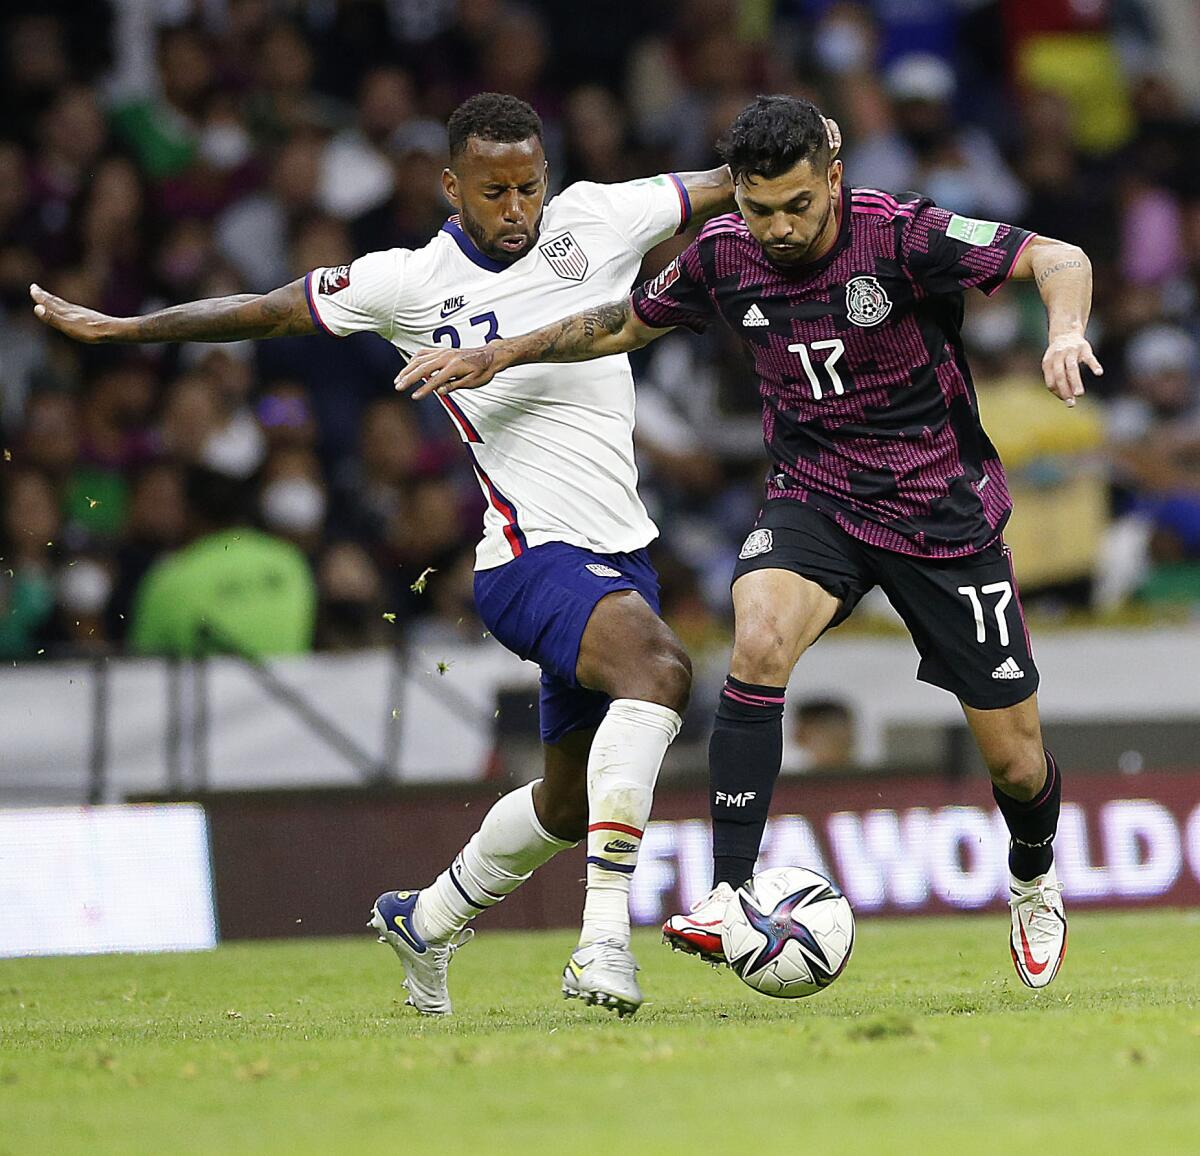 U.S. midfielder Kellyn Acosta, left, and Mexico forward Jesus Corona vie for the ball in a match last month.